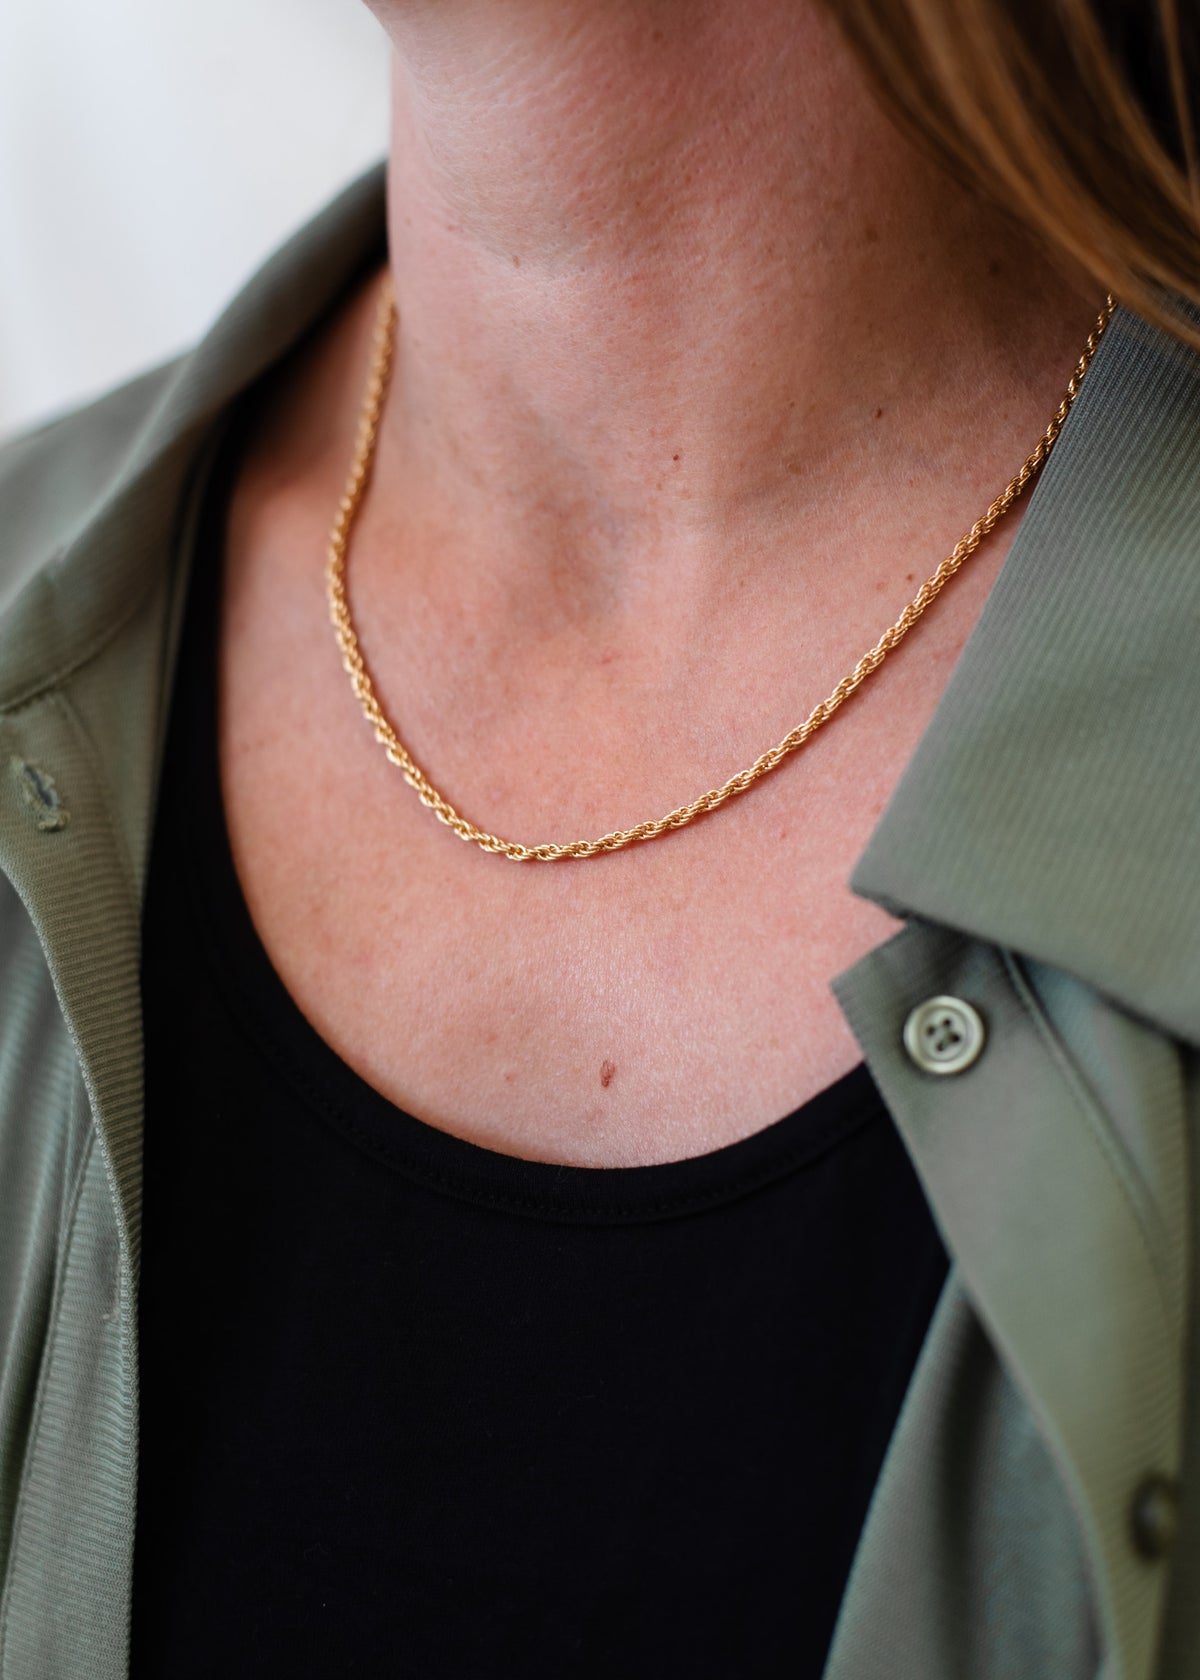 The Twist Chain Necklace